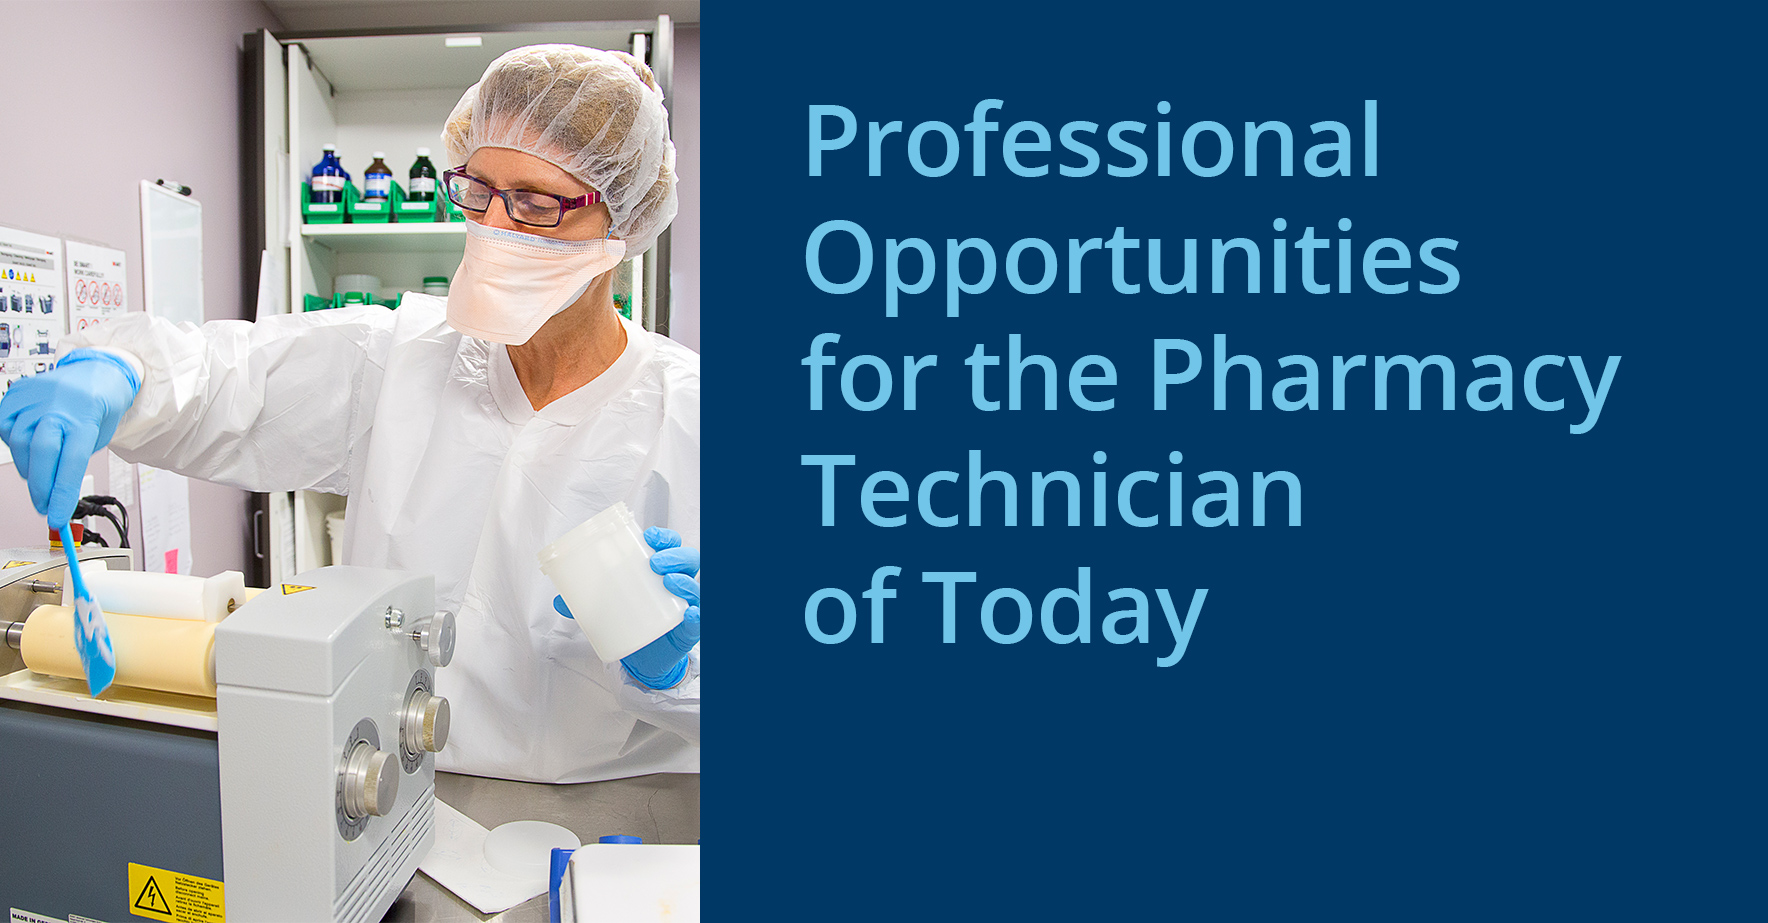 profession_opportunities_for_the_pharmacy_technician_of_today.jpg